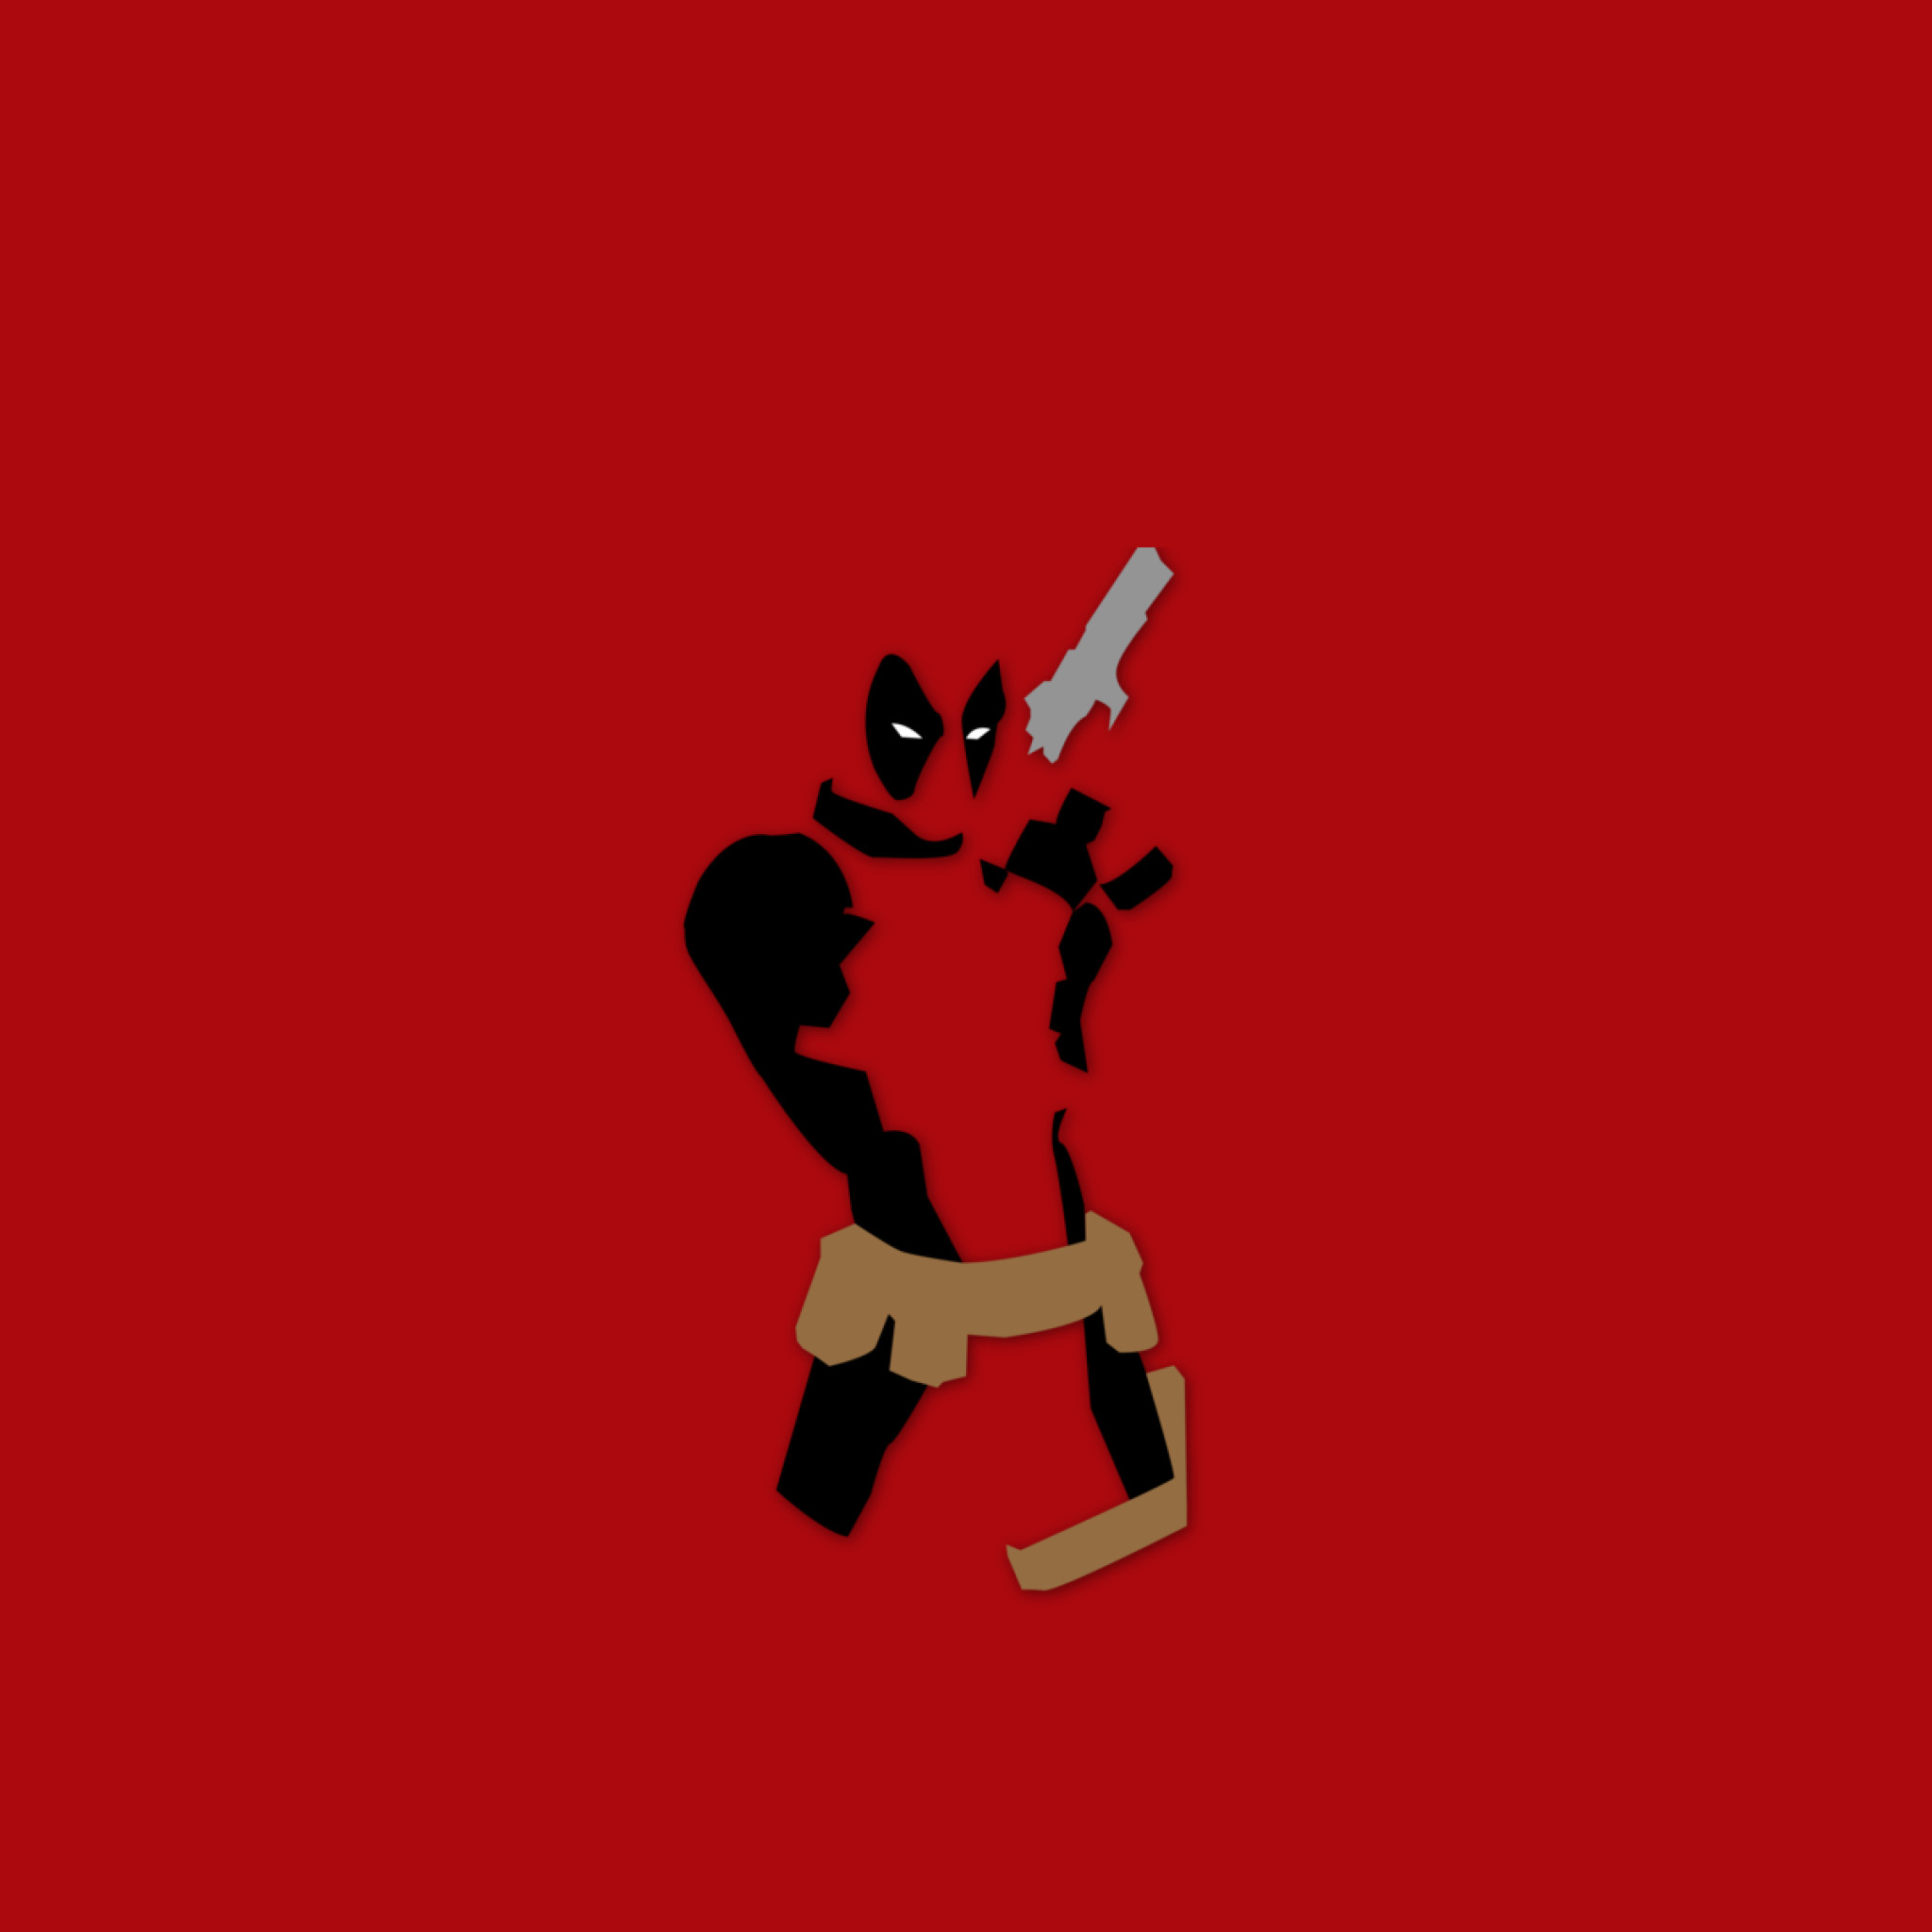 2048x2048 Red Deadpool - Tap to see more of the The Merc with a Mouth: Deadpool  Wallpapers as well as many more other awesome movies & games wallpaper!